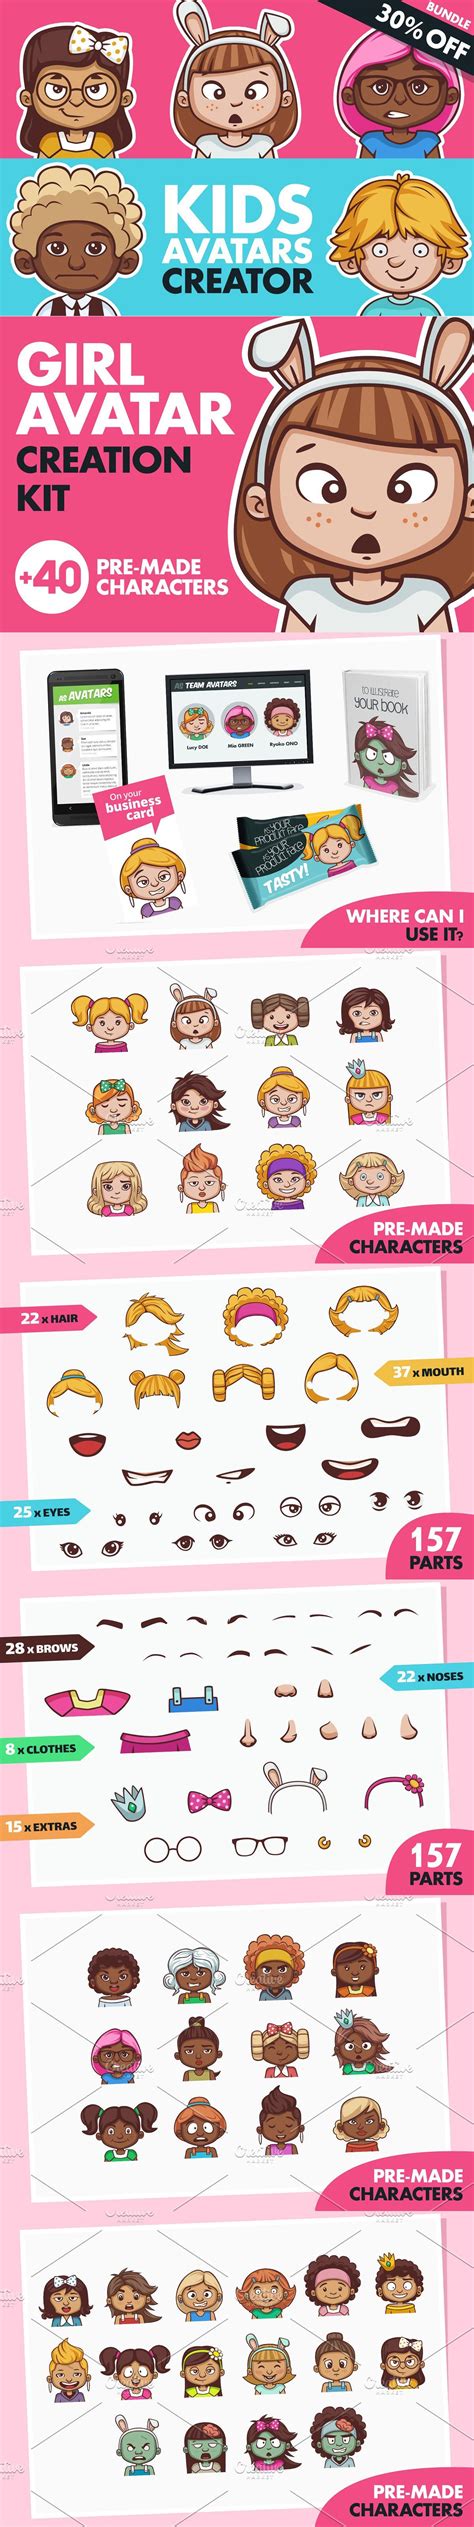 Kids Avatars Creator 80 Characters Avatar Creator Funny Games For